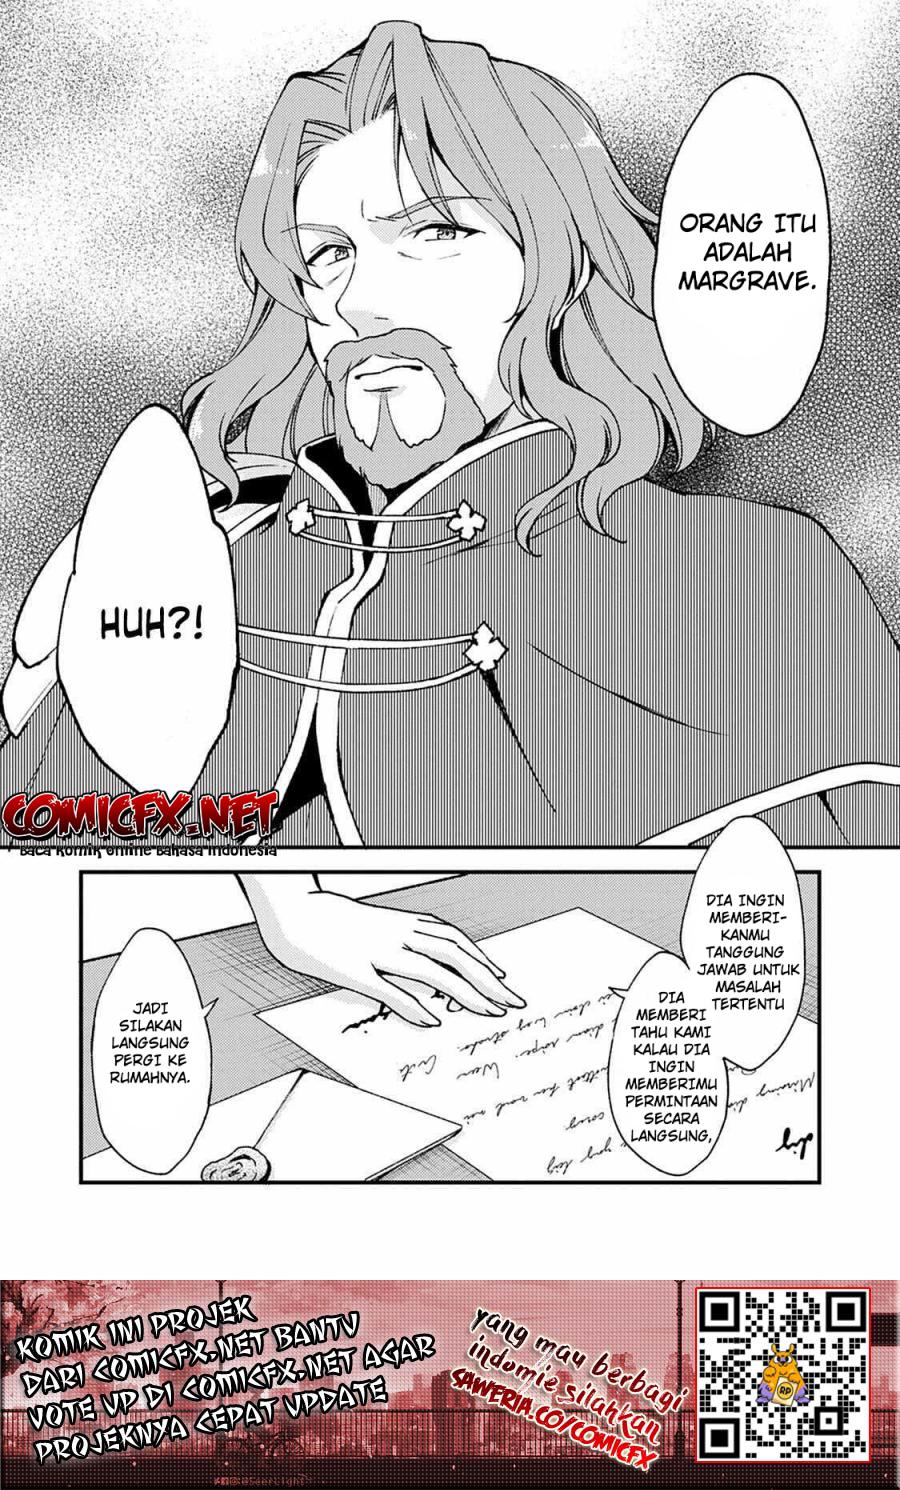 A Sword Master Childhood Friend Power Harassed Me Harshly, So I Broke off Our Relationship and Make a Fresh Start at the Frontier as a Magic Swordsman Chapter 8.1